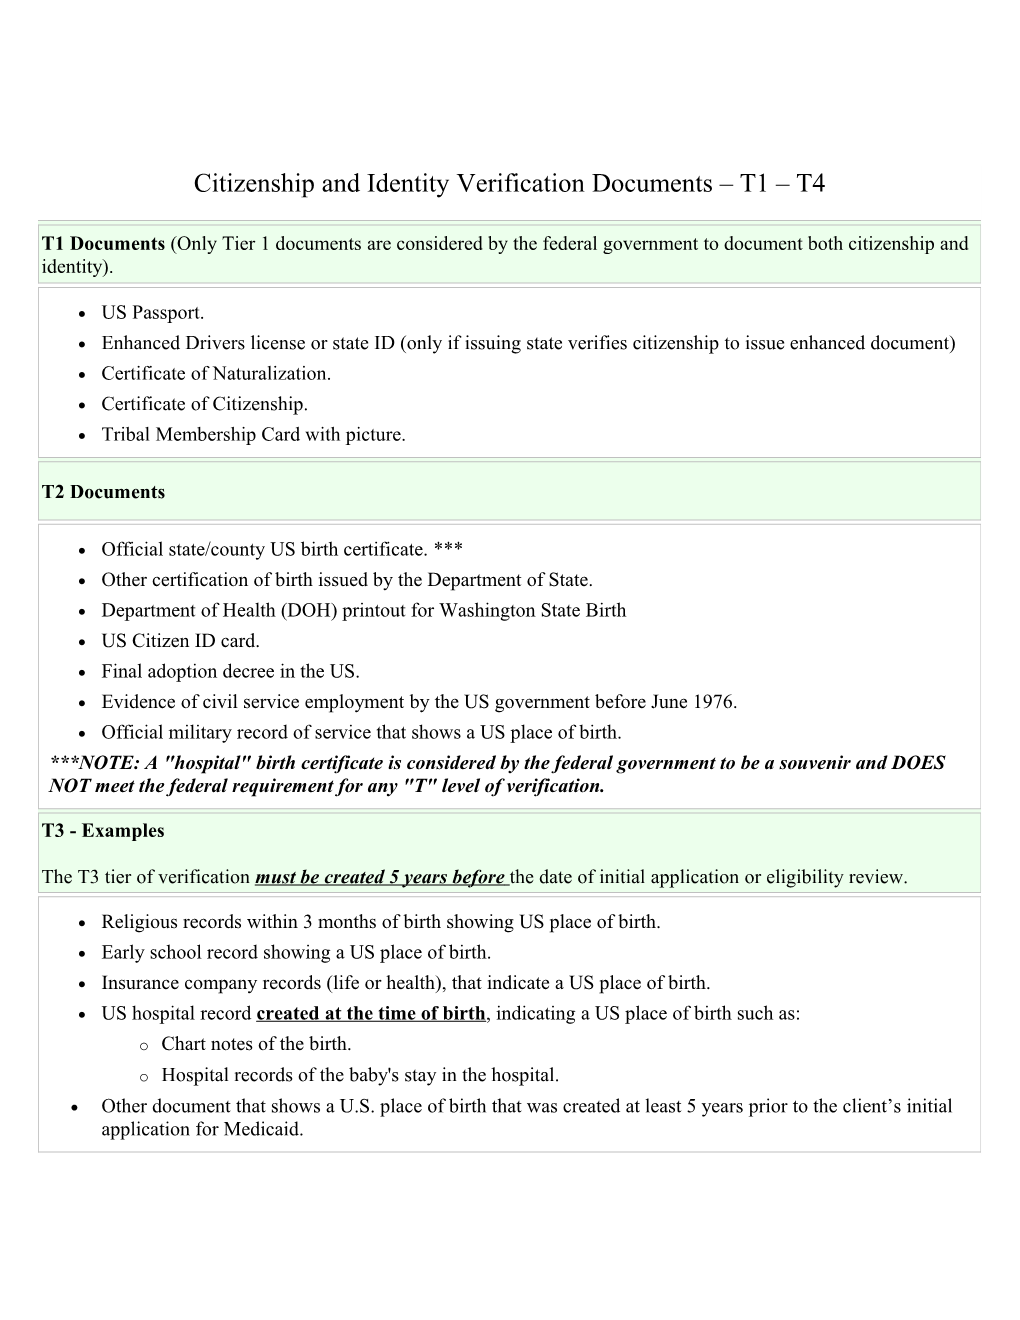 Citizenship and Identity Documents - Tier 1-4